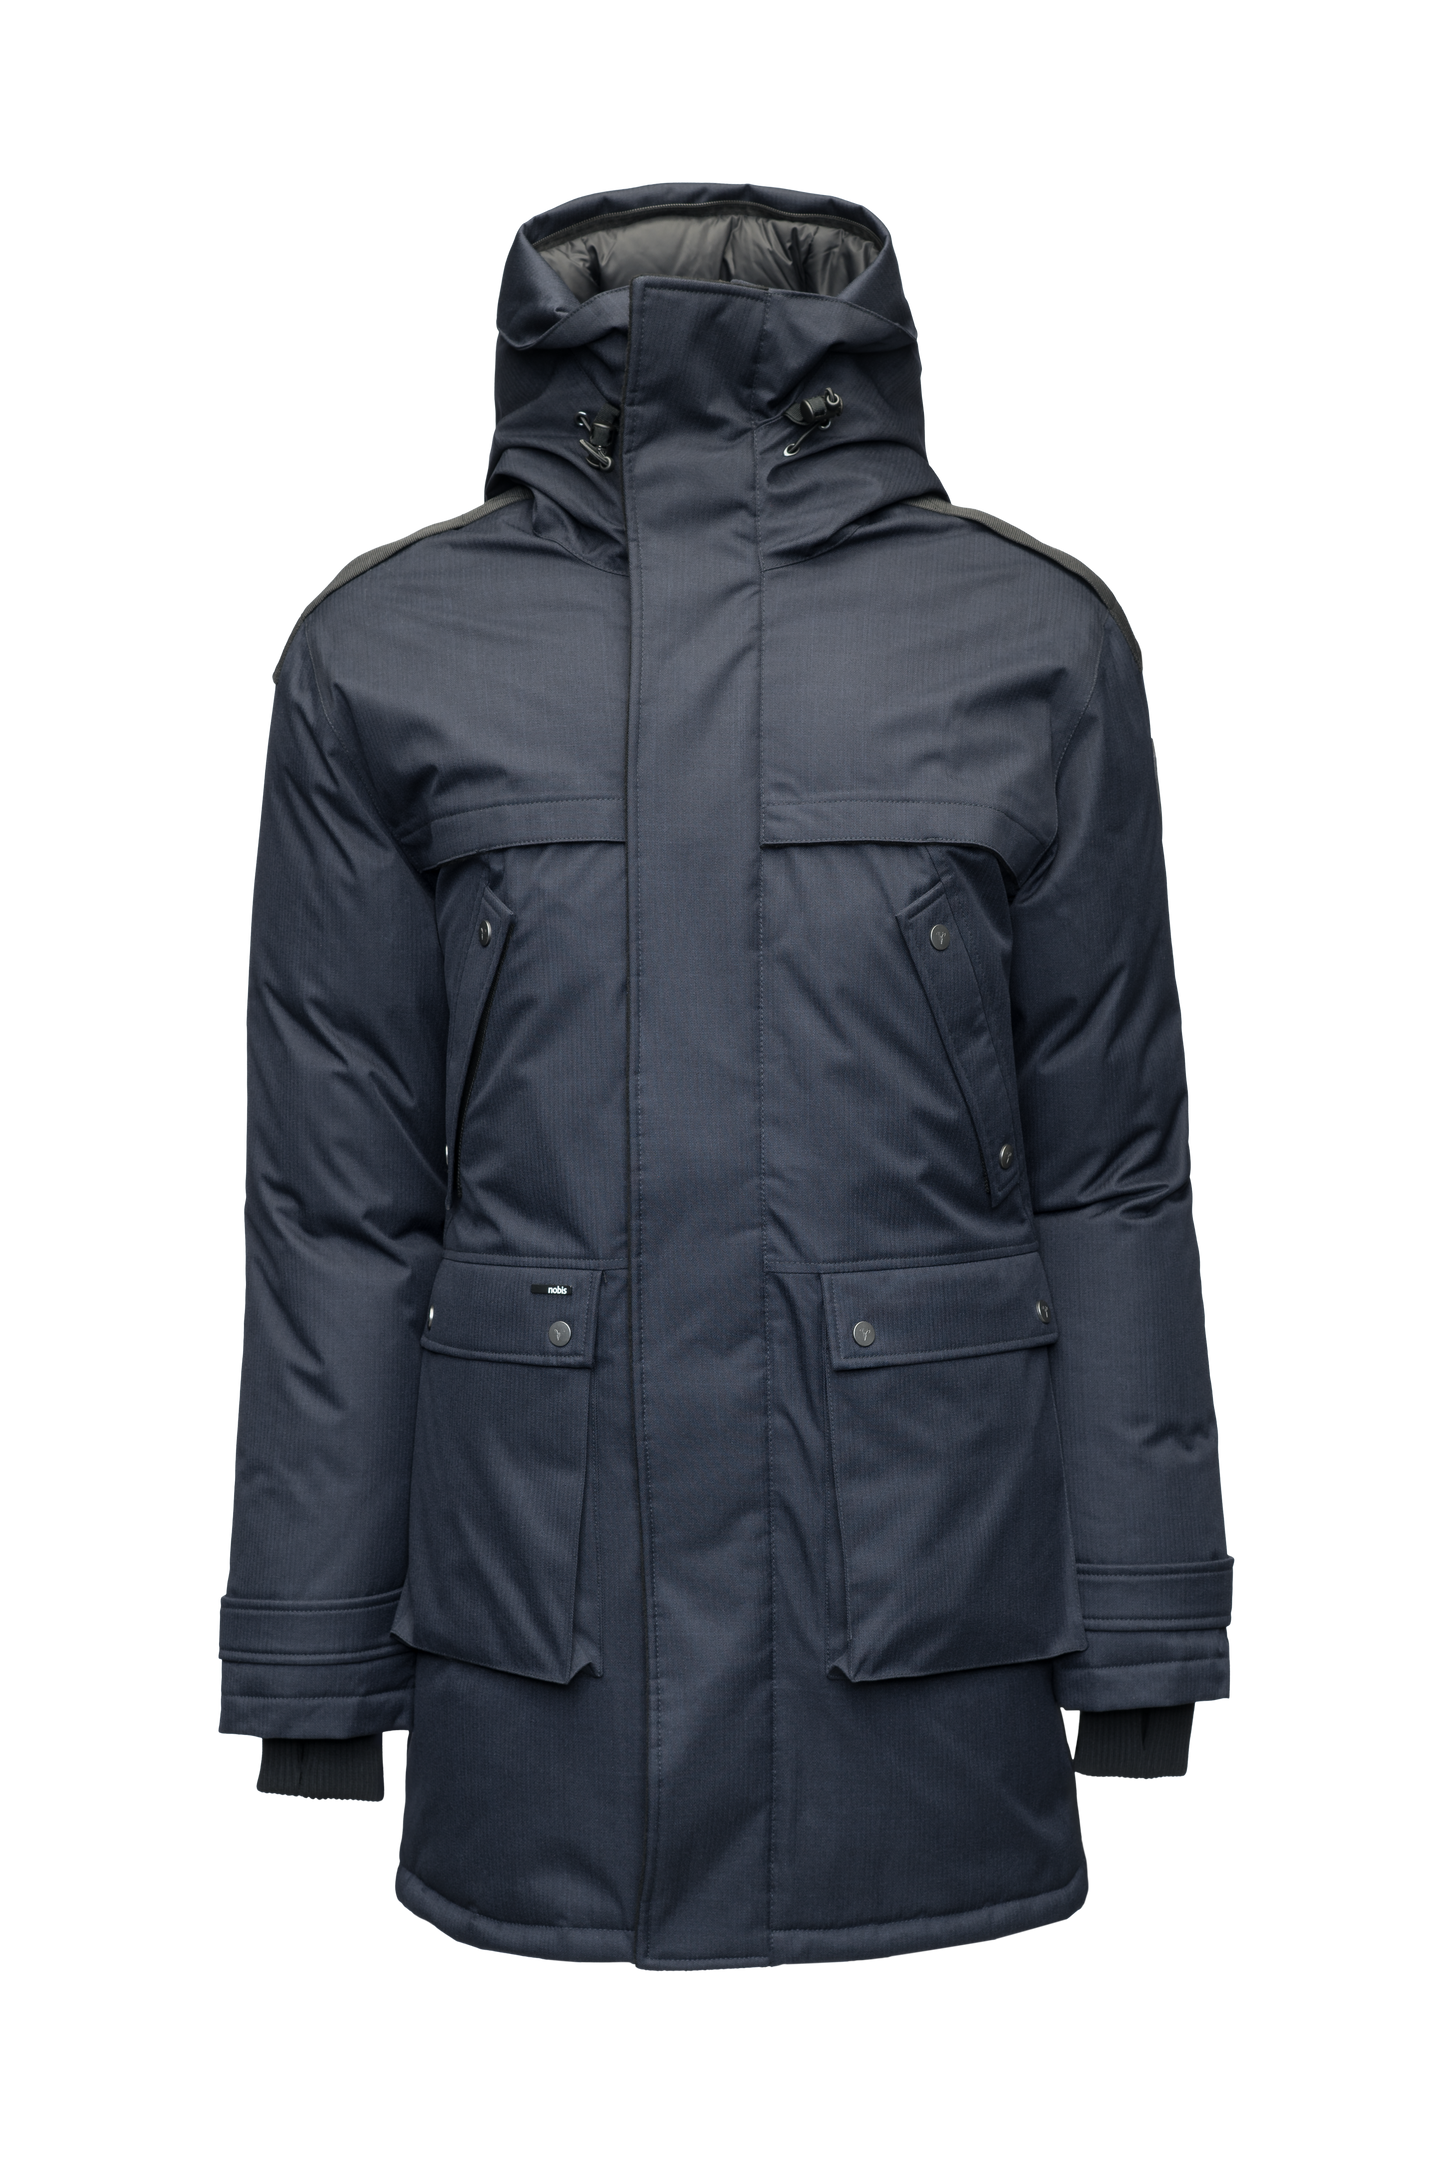 Men's Best Selling Parka the Yatesy is a down filled jacket with a zipper closure and magnetic placket in Navy